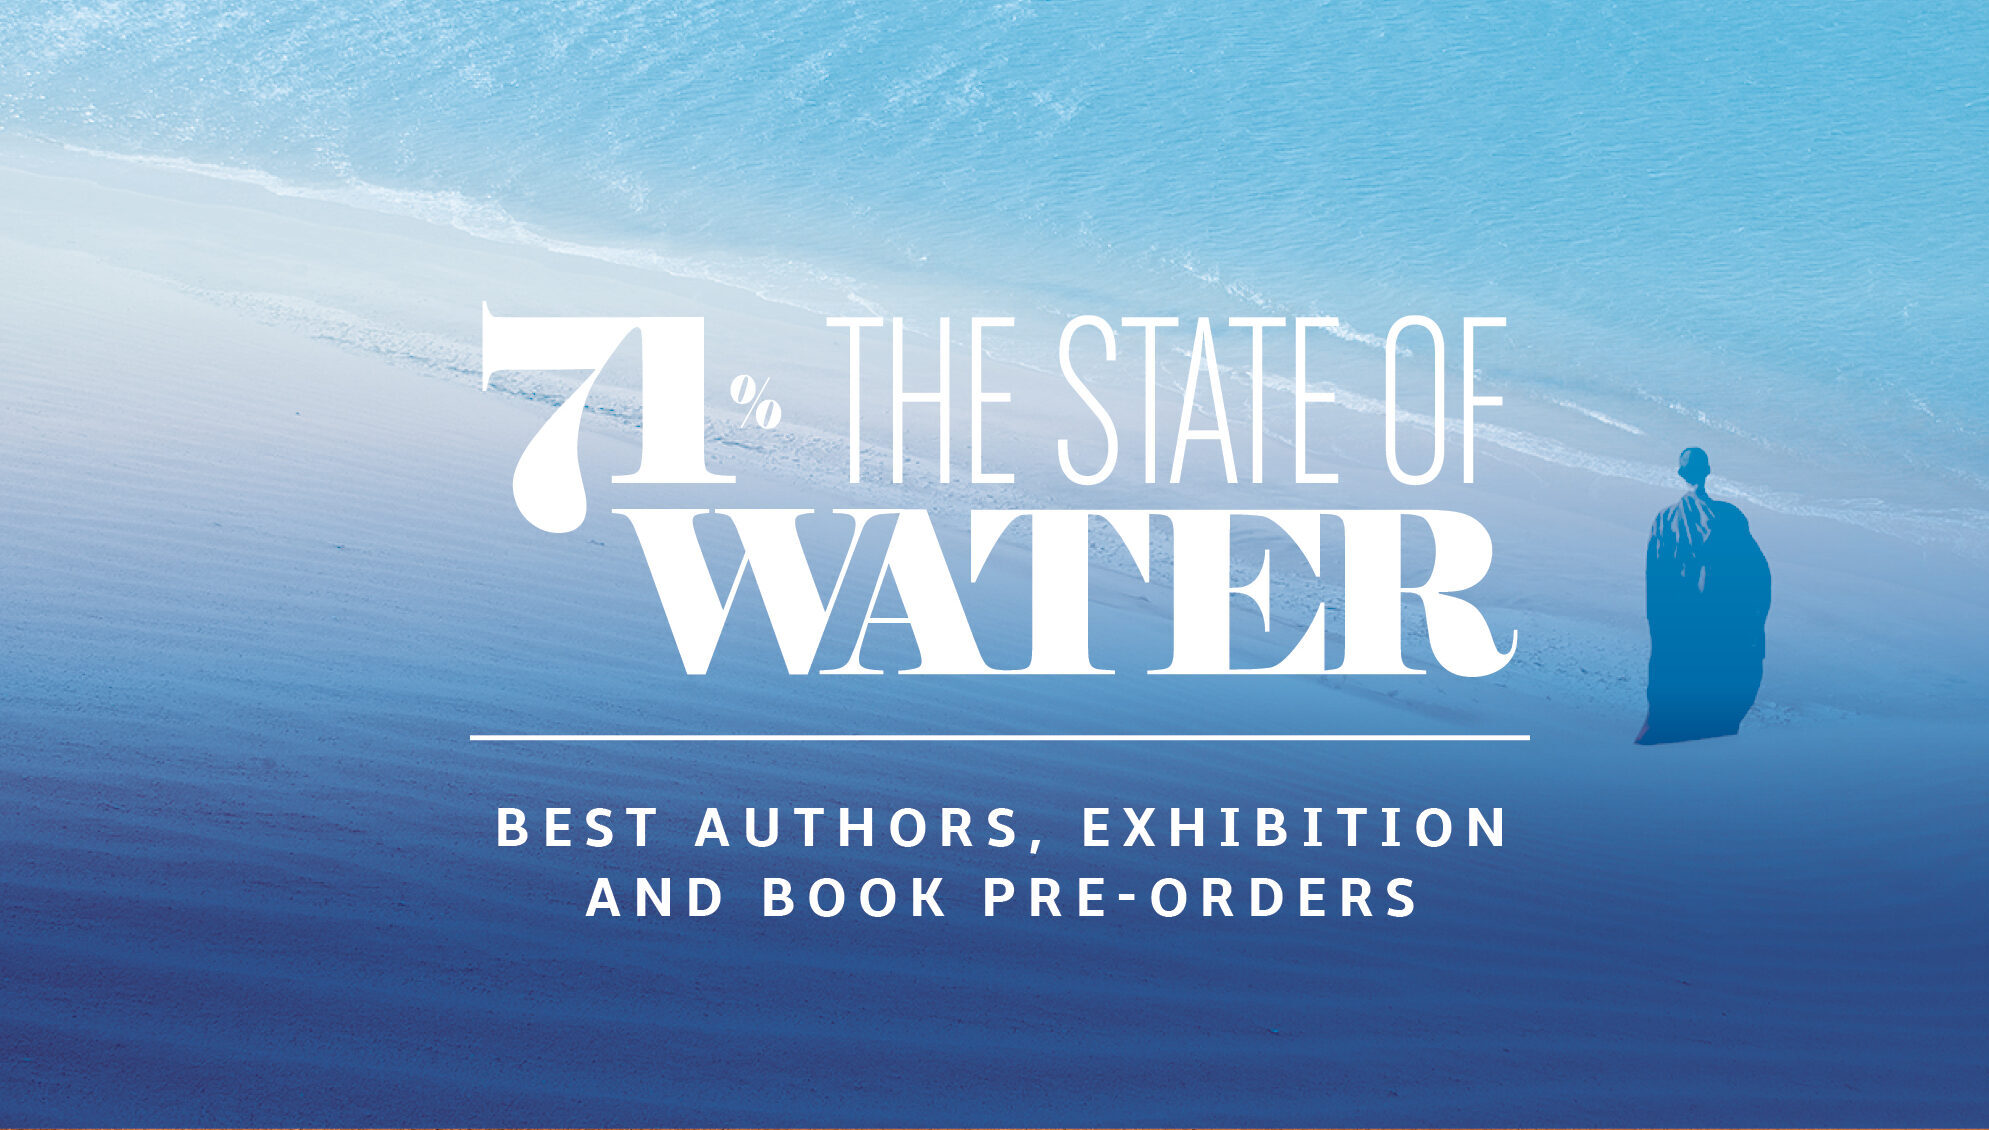 71% - The State of Water: selected photographers, best authors and book pre-orders